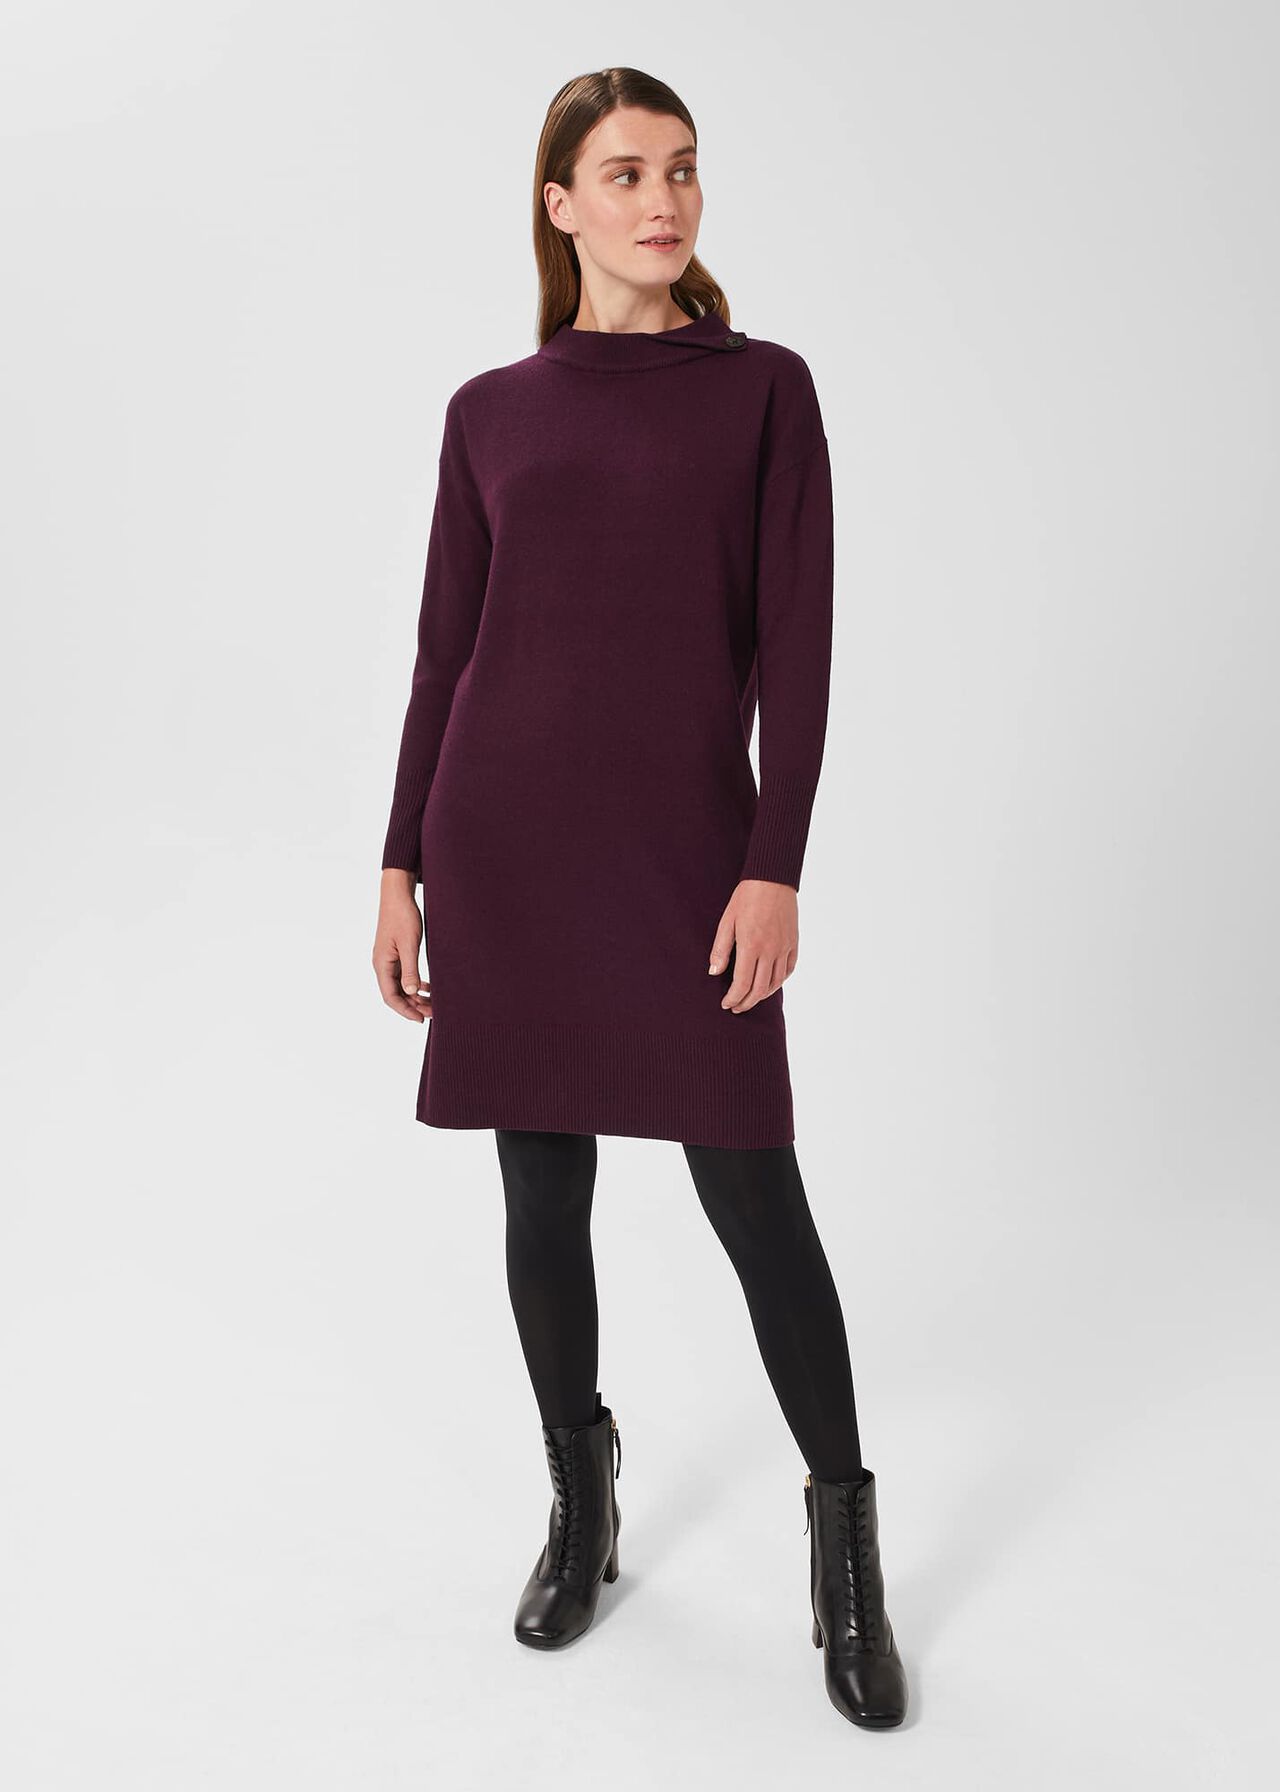 Talia Knitted Dress With Cashmere, Dark Plum, hi-res